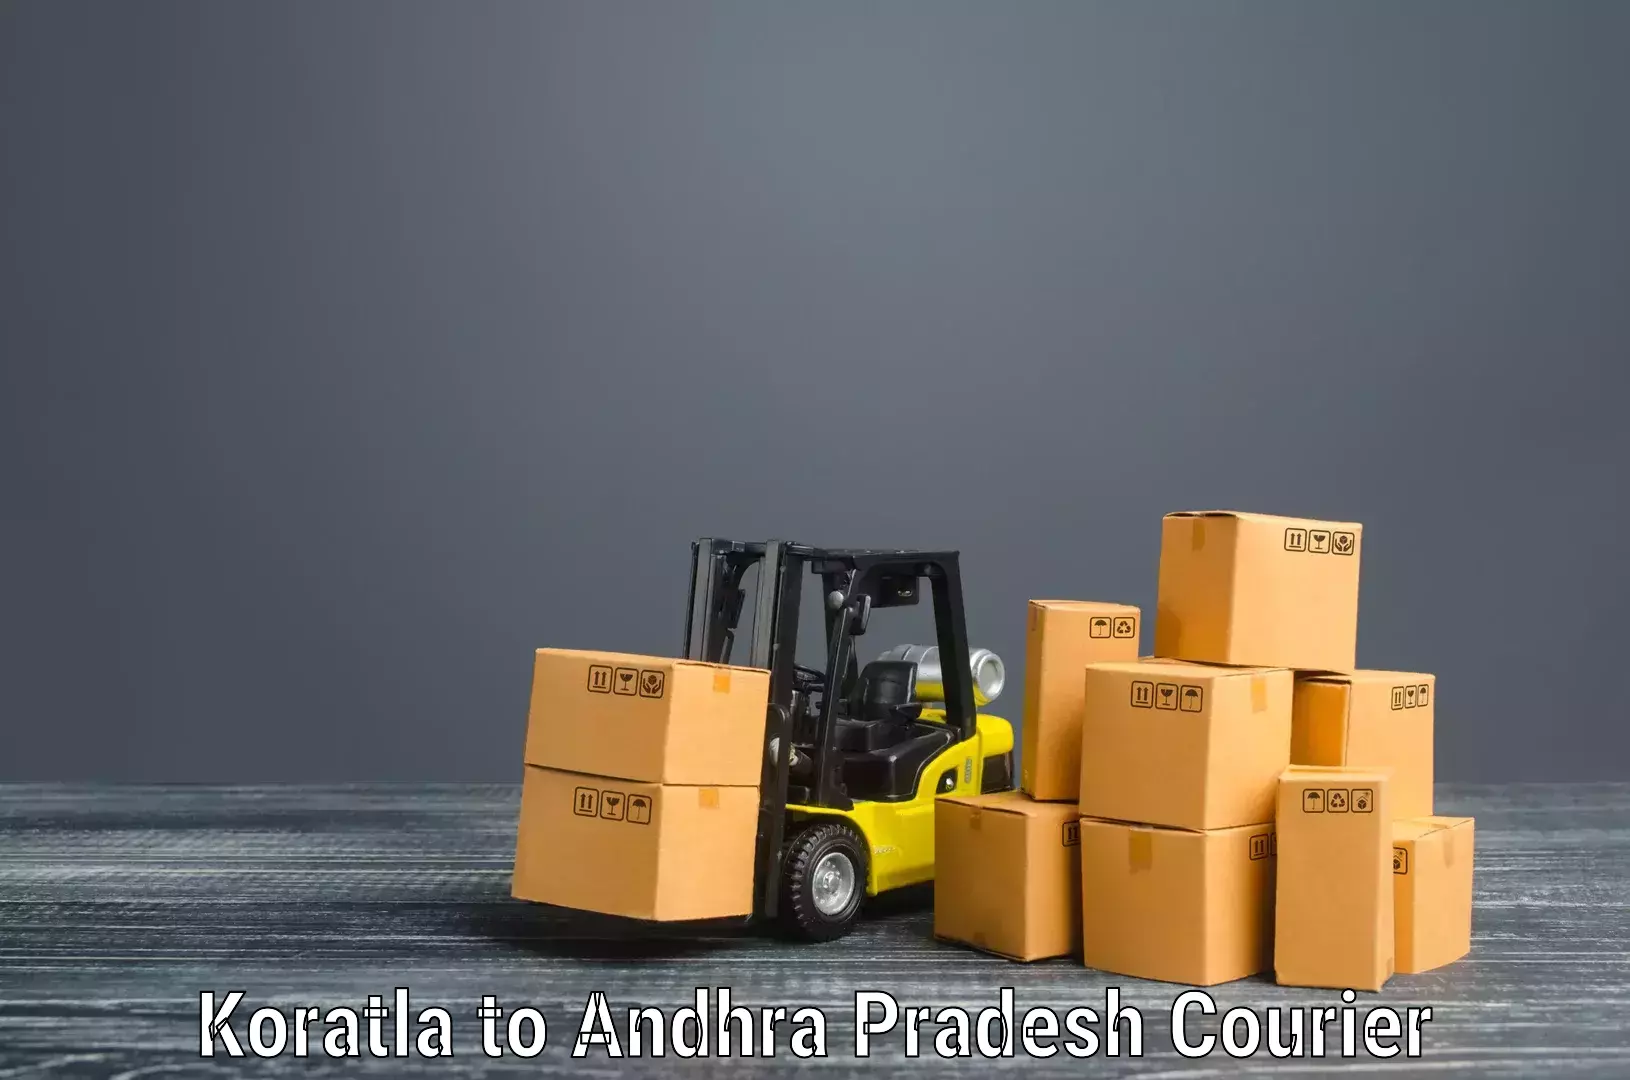 Reliable moving assistance in Koratla to Kudair